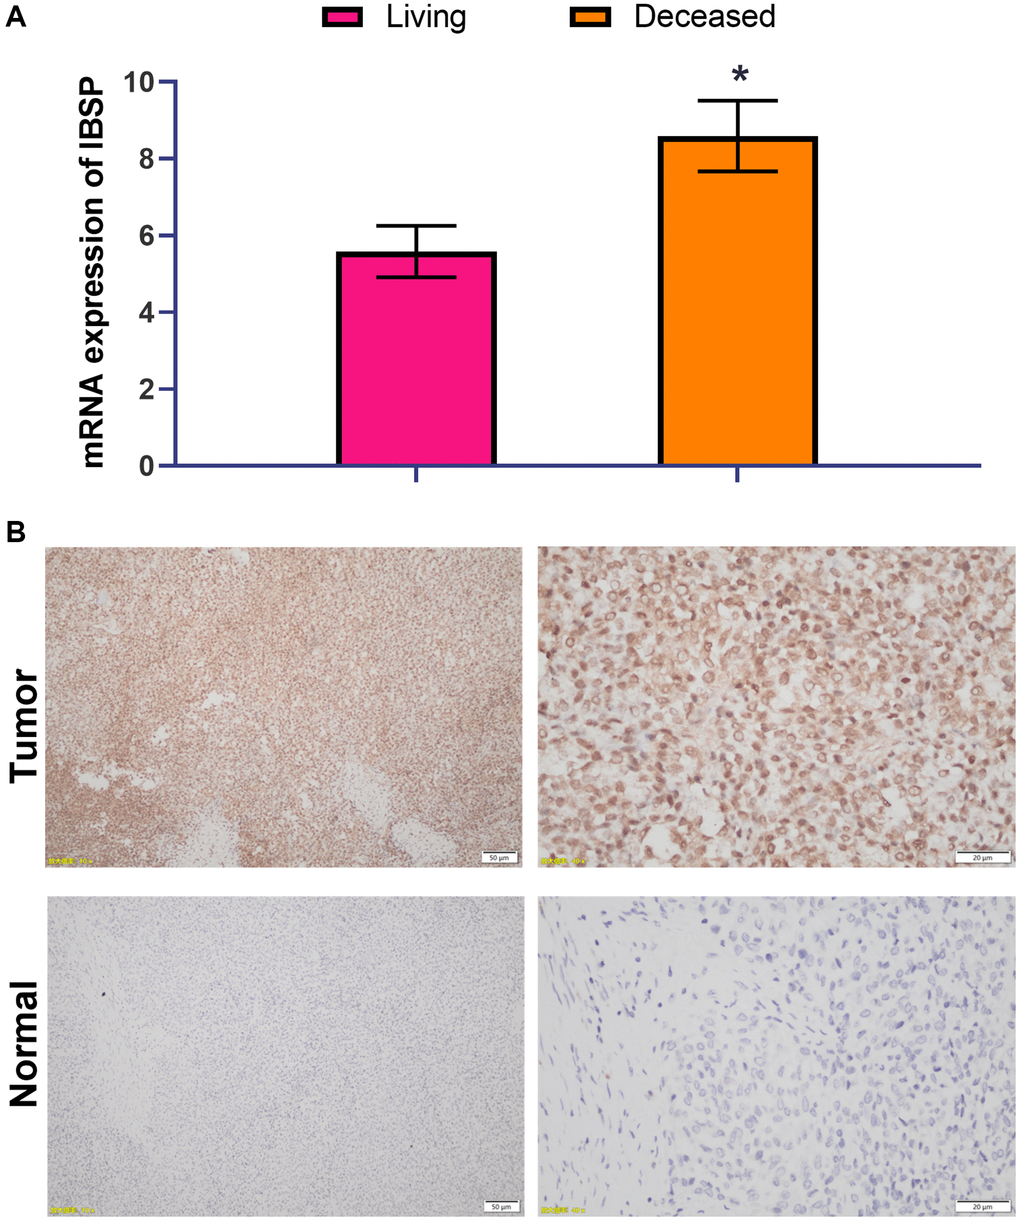 High IBSP expression is associated with poor survival. (A) The prognostic significance of IBSP expression was validated by RT-PCR with another cohort consisting of 21 living patients and 11 deceased patients. (B) The protein expression of IBSP by IHC staining. Scale bar = 50 μm (left panel); scale bar = 20 μm (right panel). *P 